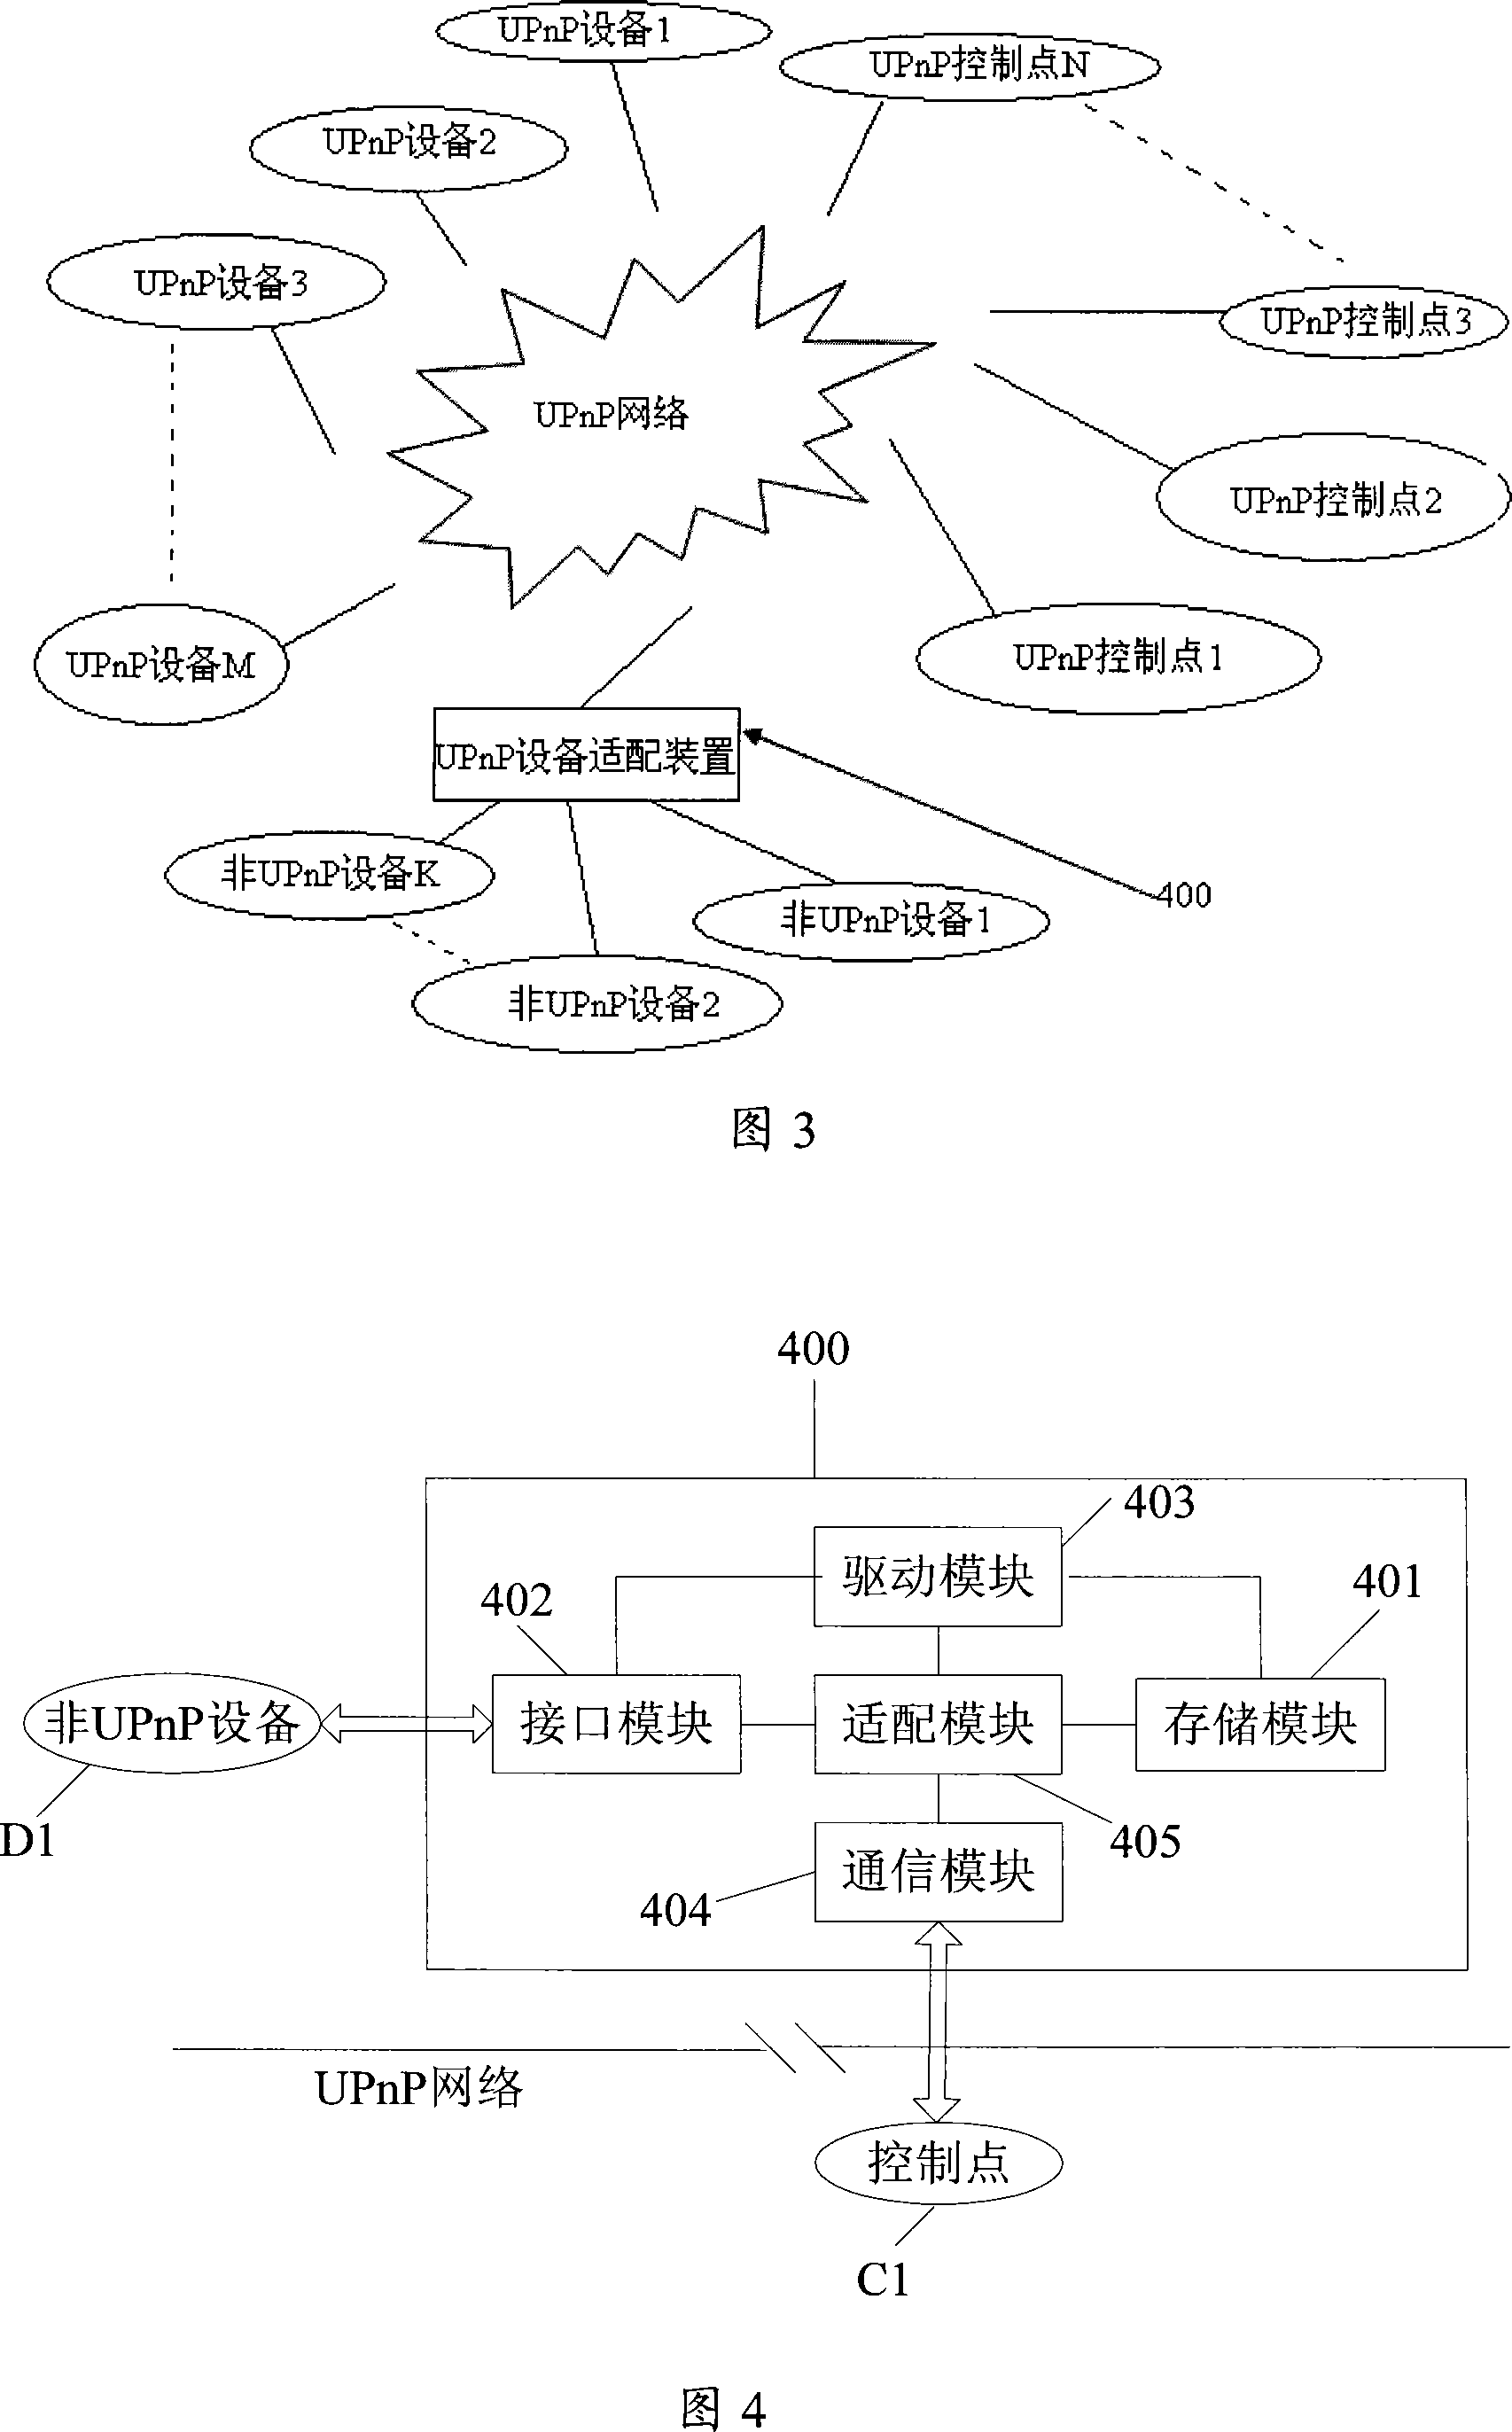 Method, device and system for controlling non-universal plug-and-play UPnP equipment